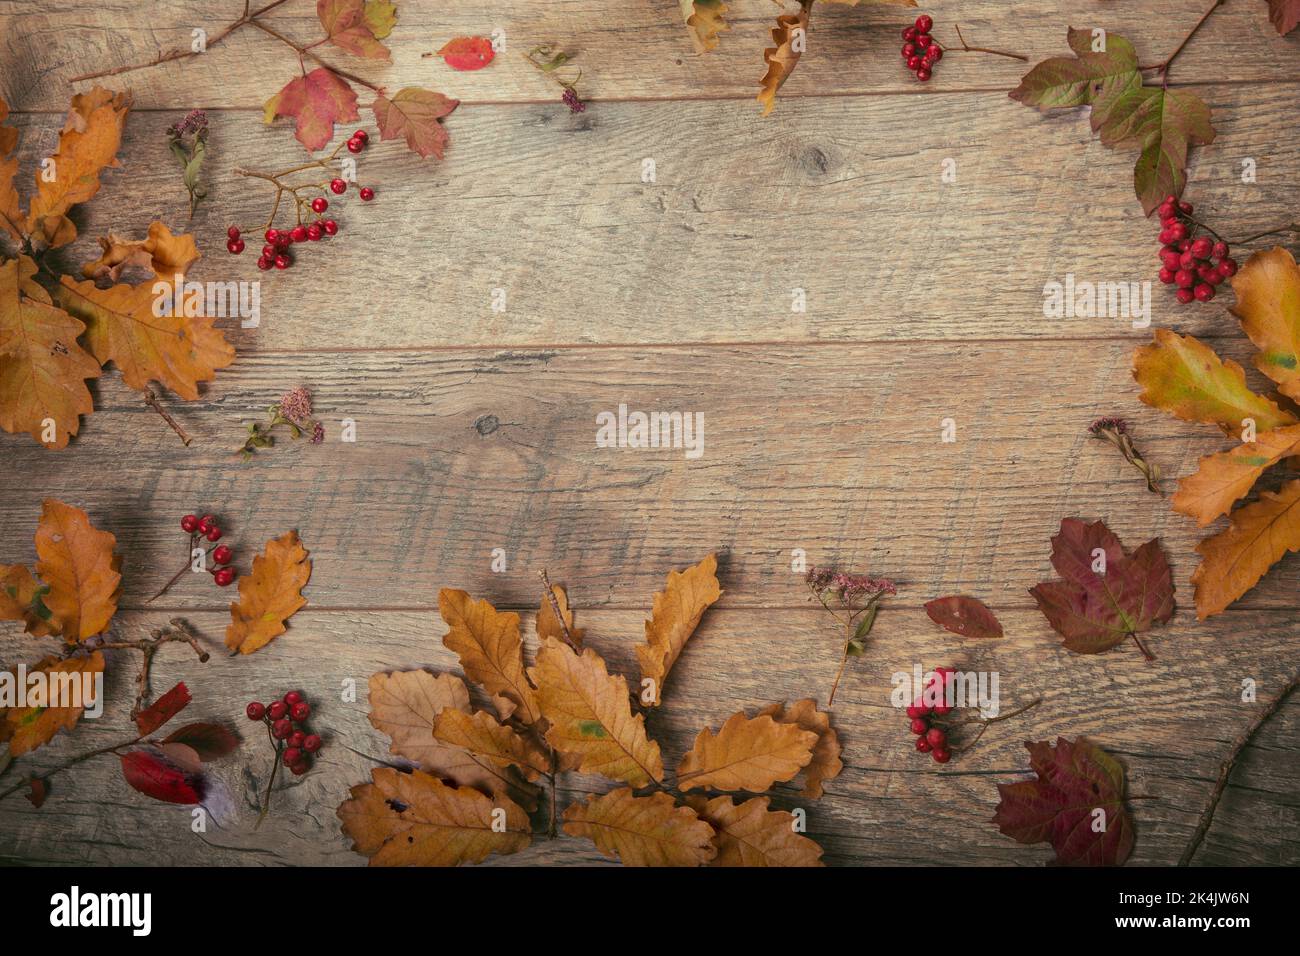 Branch with autumn dry oak leaves on rustic wooden background. Top view, flat lay. Stock Photo